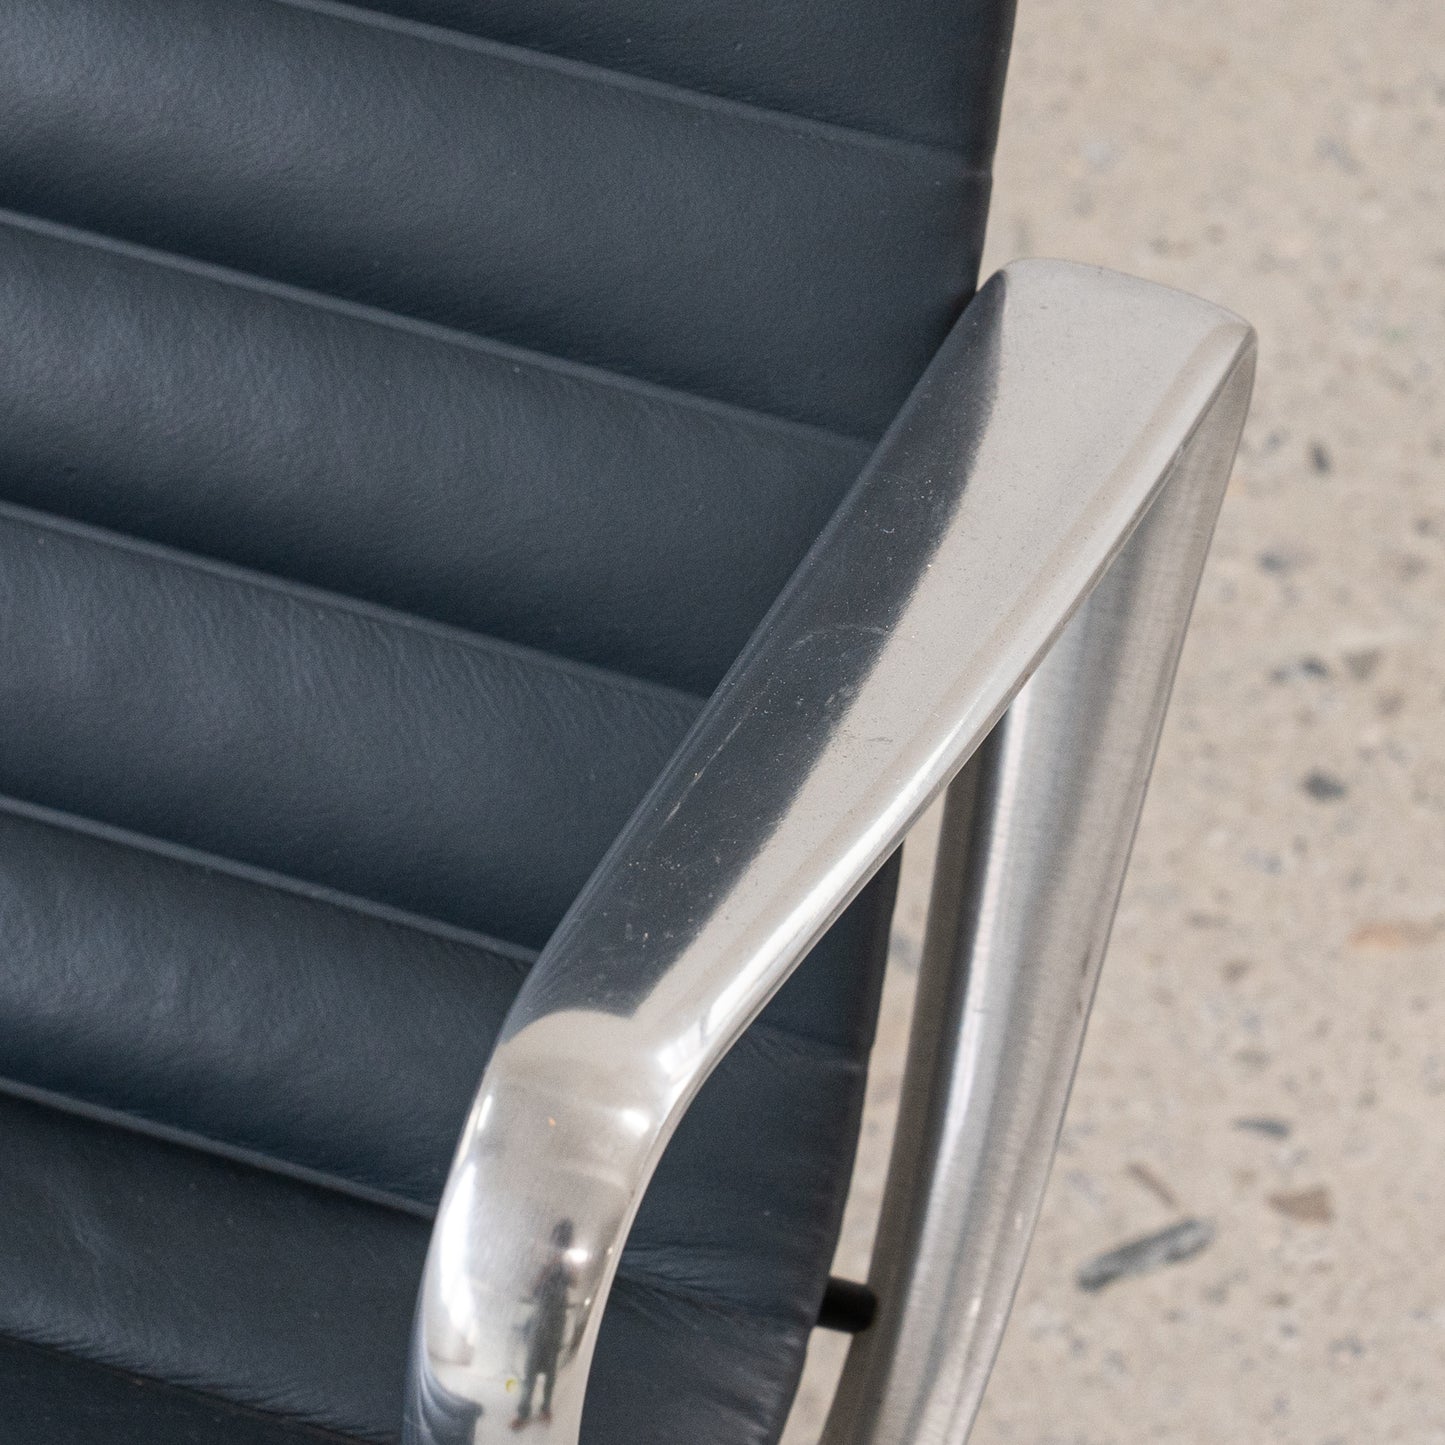 (LOT 06) Aluminum Group Lounge Chair (3세대, Charcoal) by Charles & Ray Eames